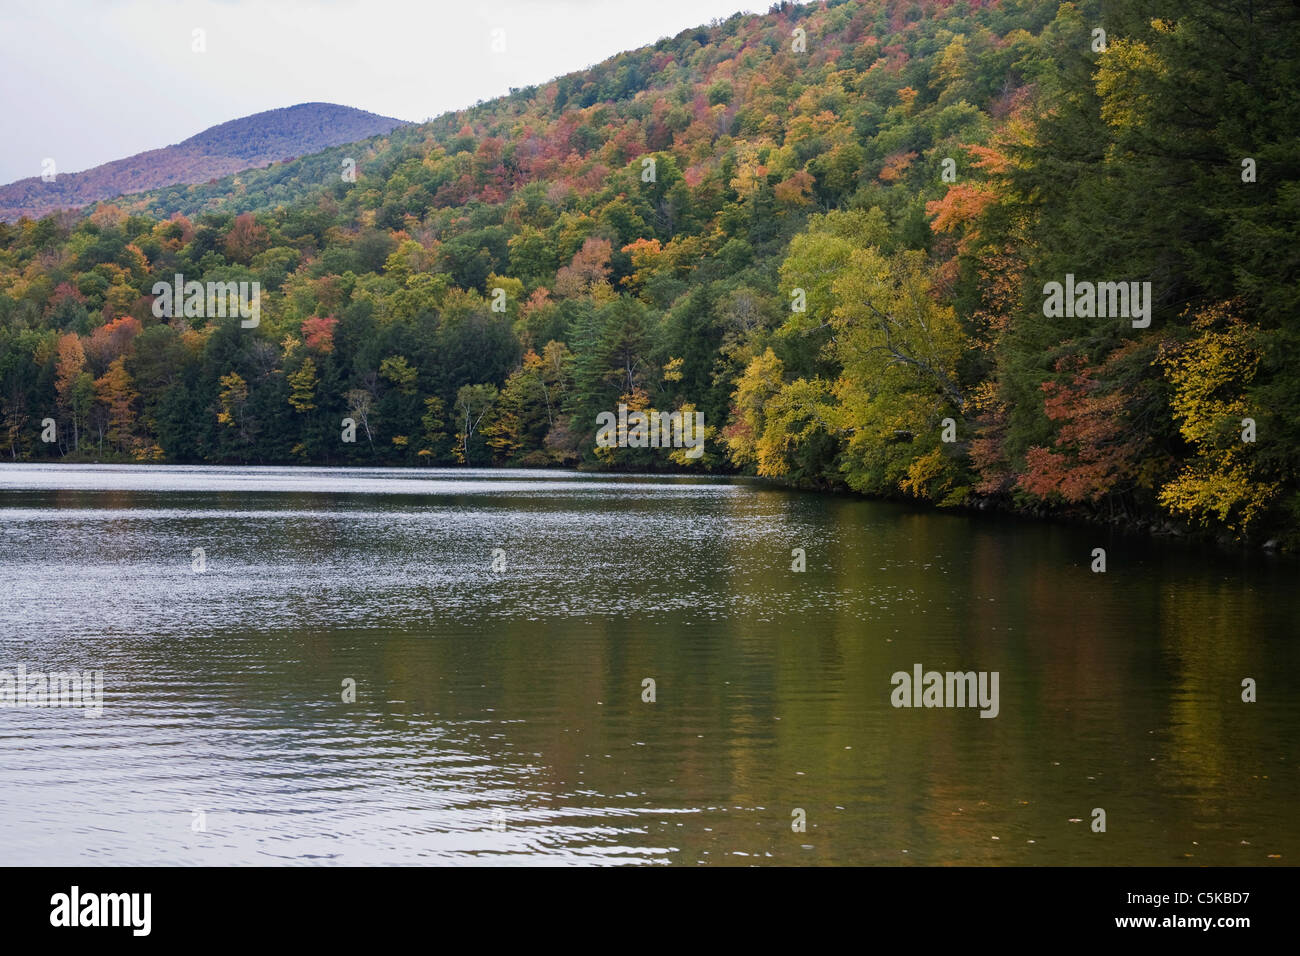 Emerald lake surrounded by mountainsides of trees in Fall color. Stock Photo